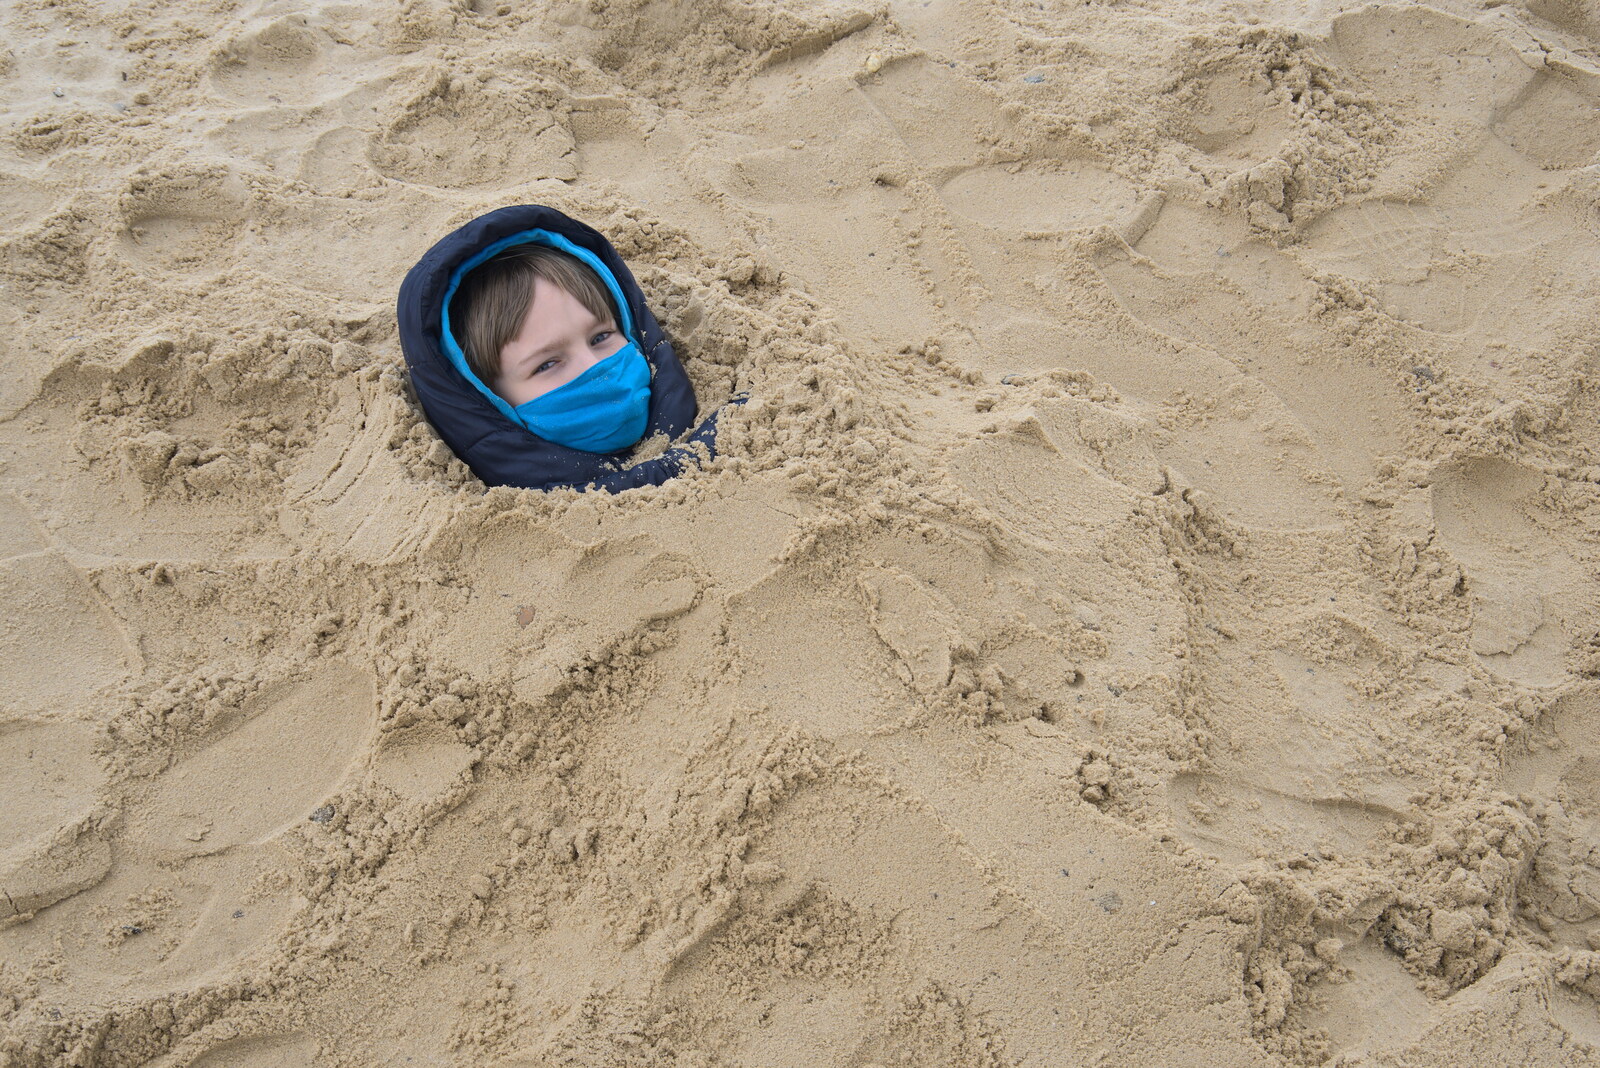 Nosher buries Harry from A Chilly Trip to the Beach, Southwold Harbour, Suffolk - 2nd May 2021